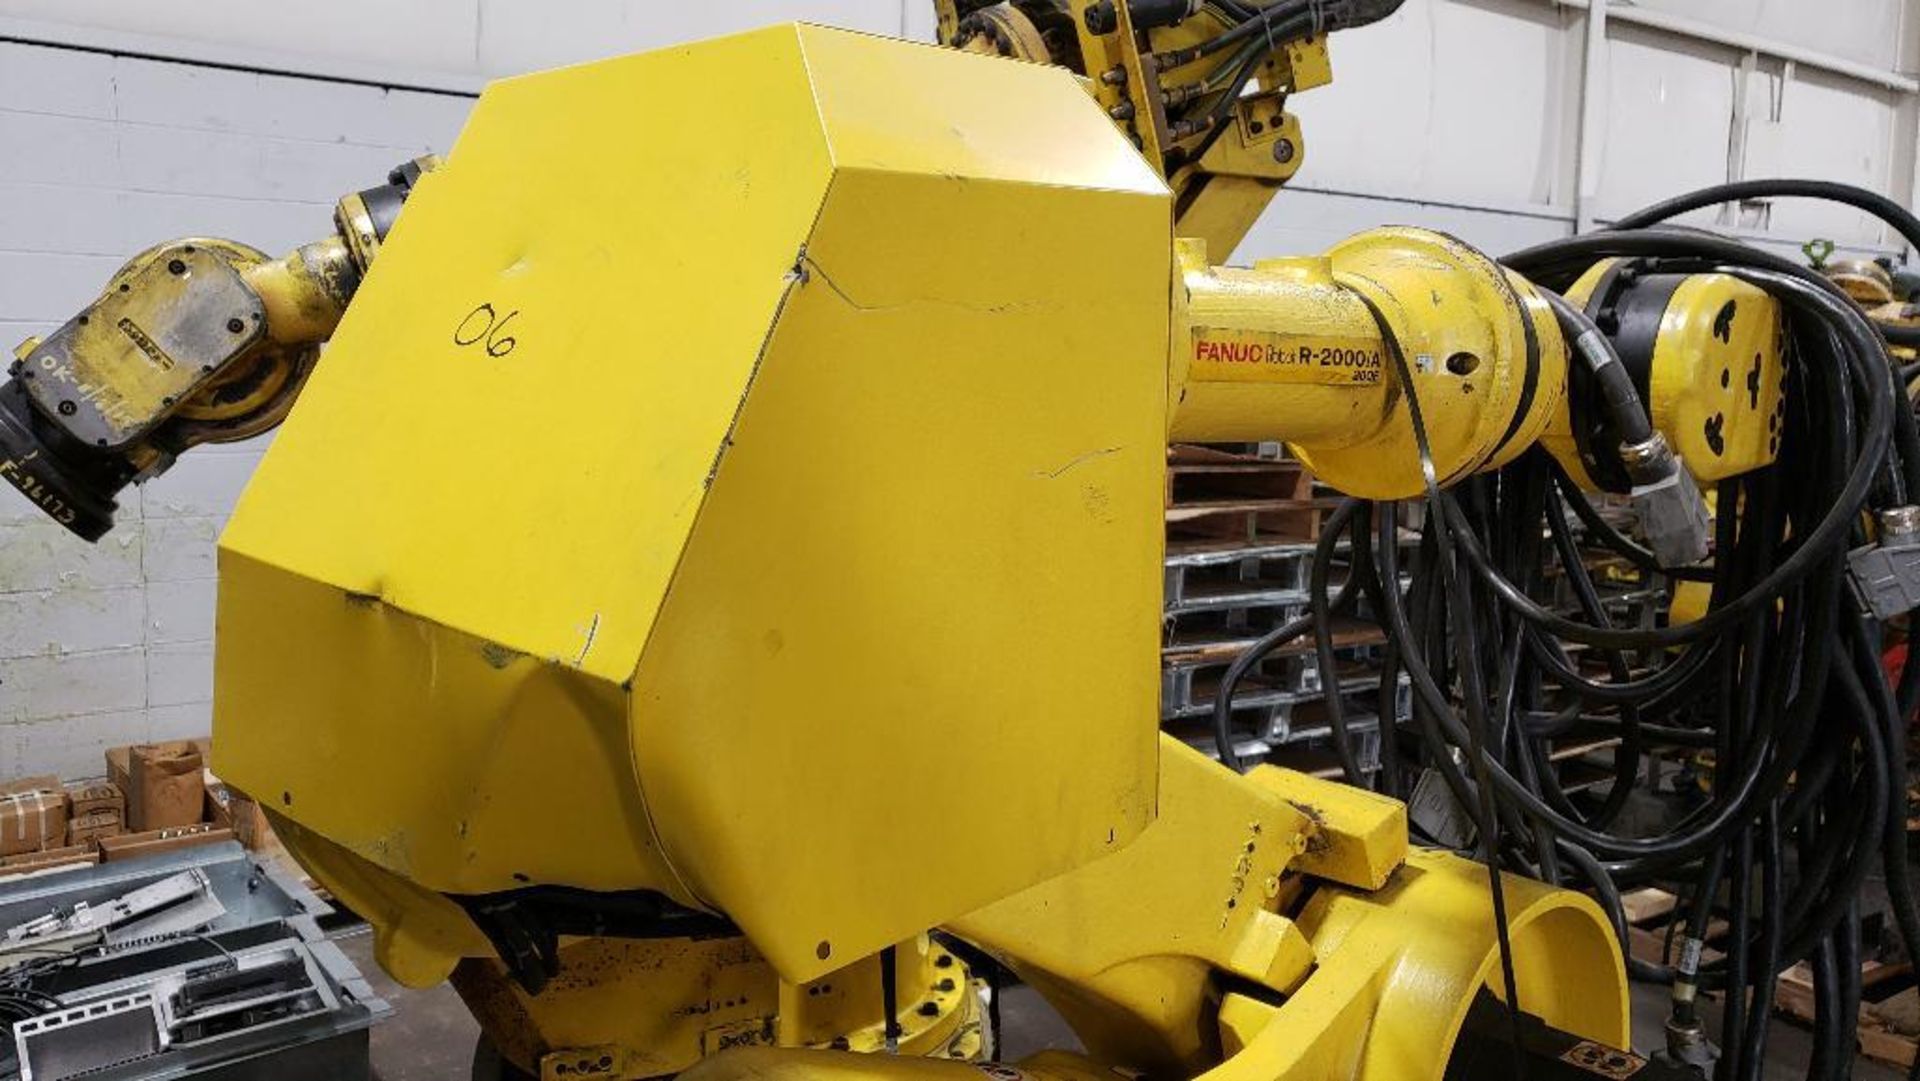 Fanuc R-2000iA/200F robot with Fanuc System R-J3iB controller. - Image 5 of 16